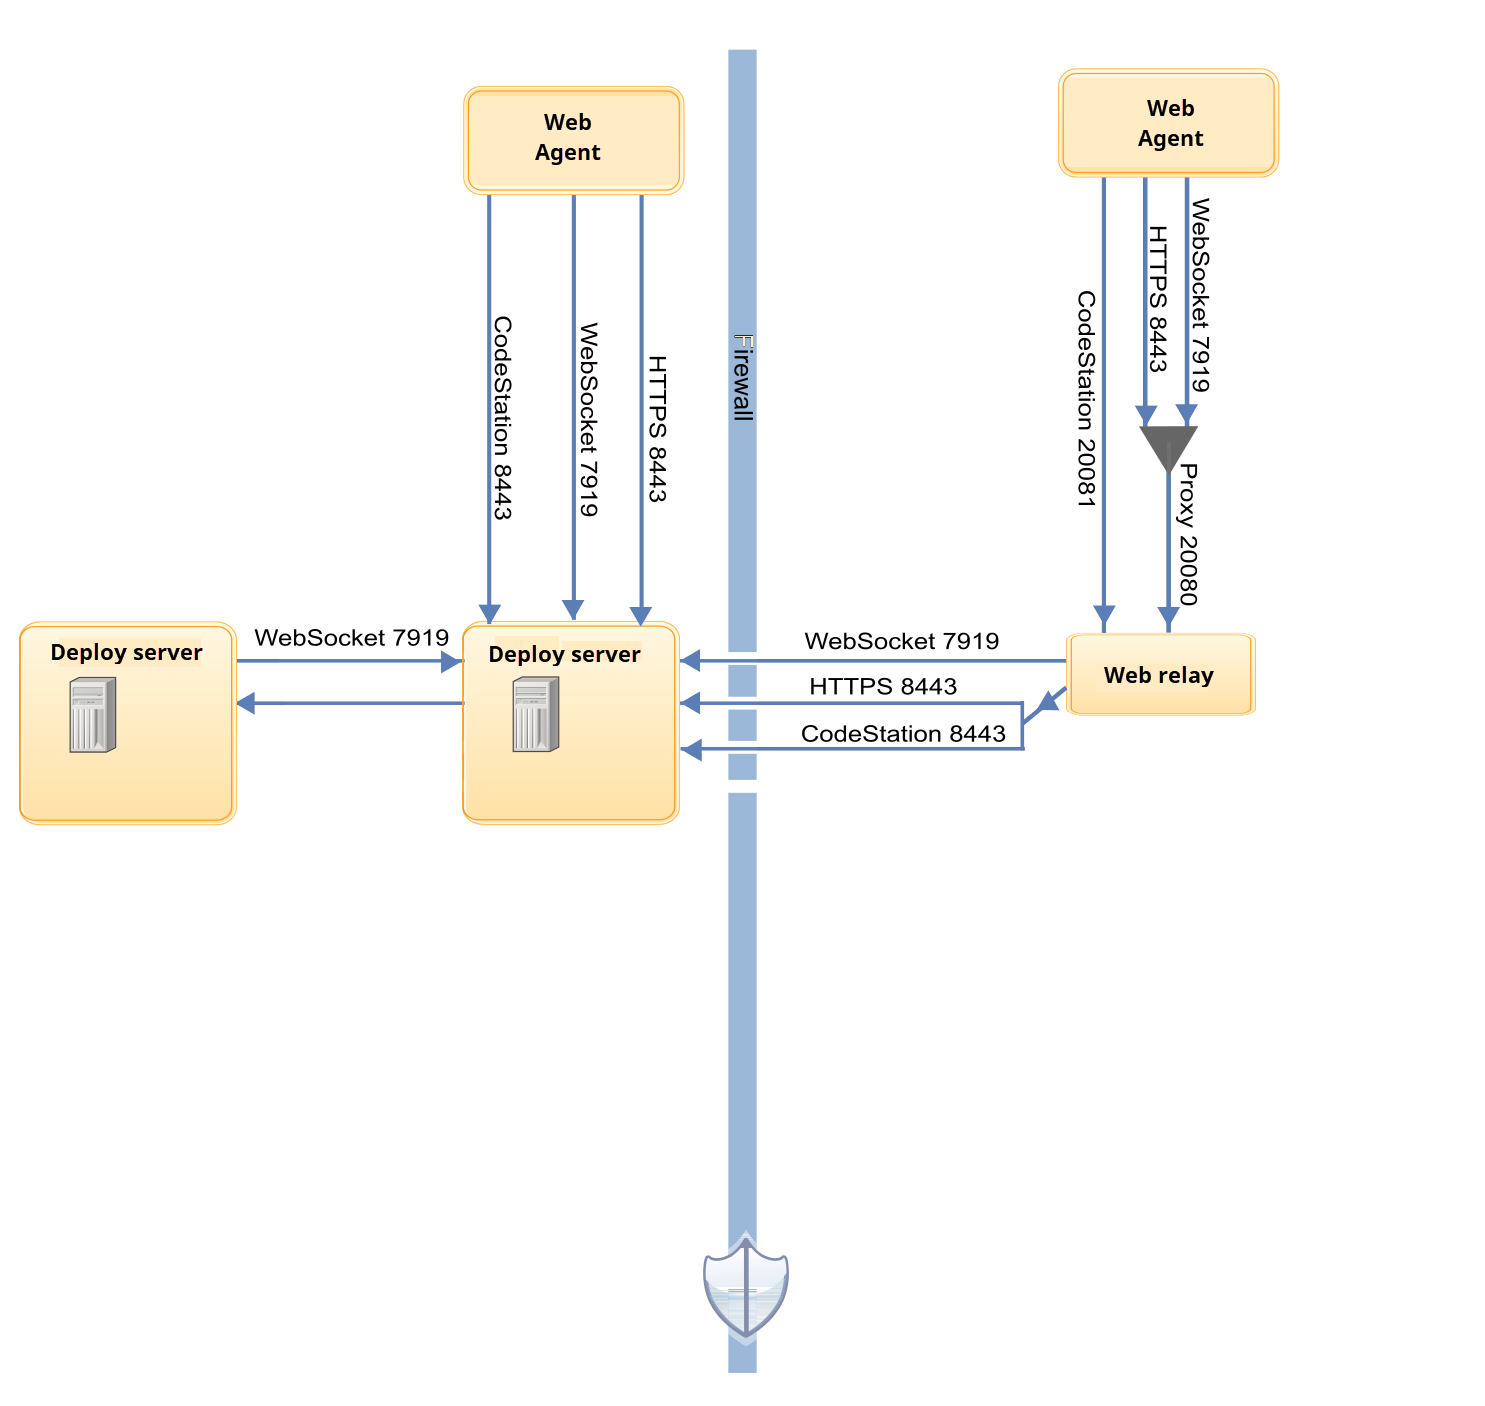 A diagram of the ports that agents, agent relays, and servers use to communicate